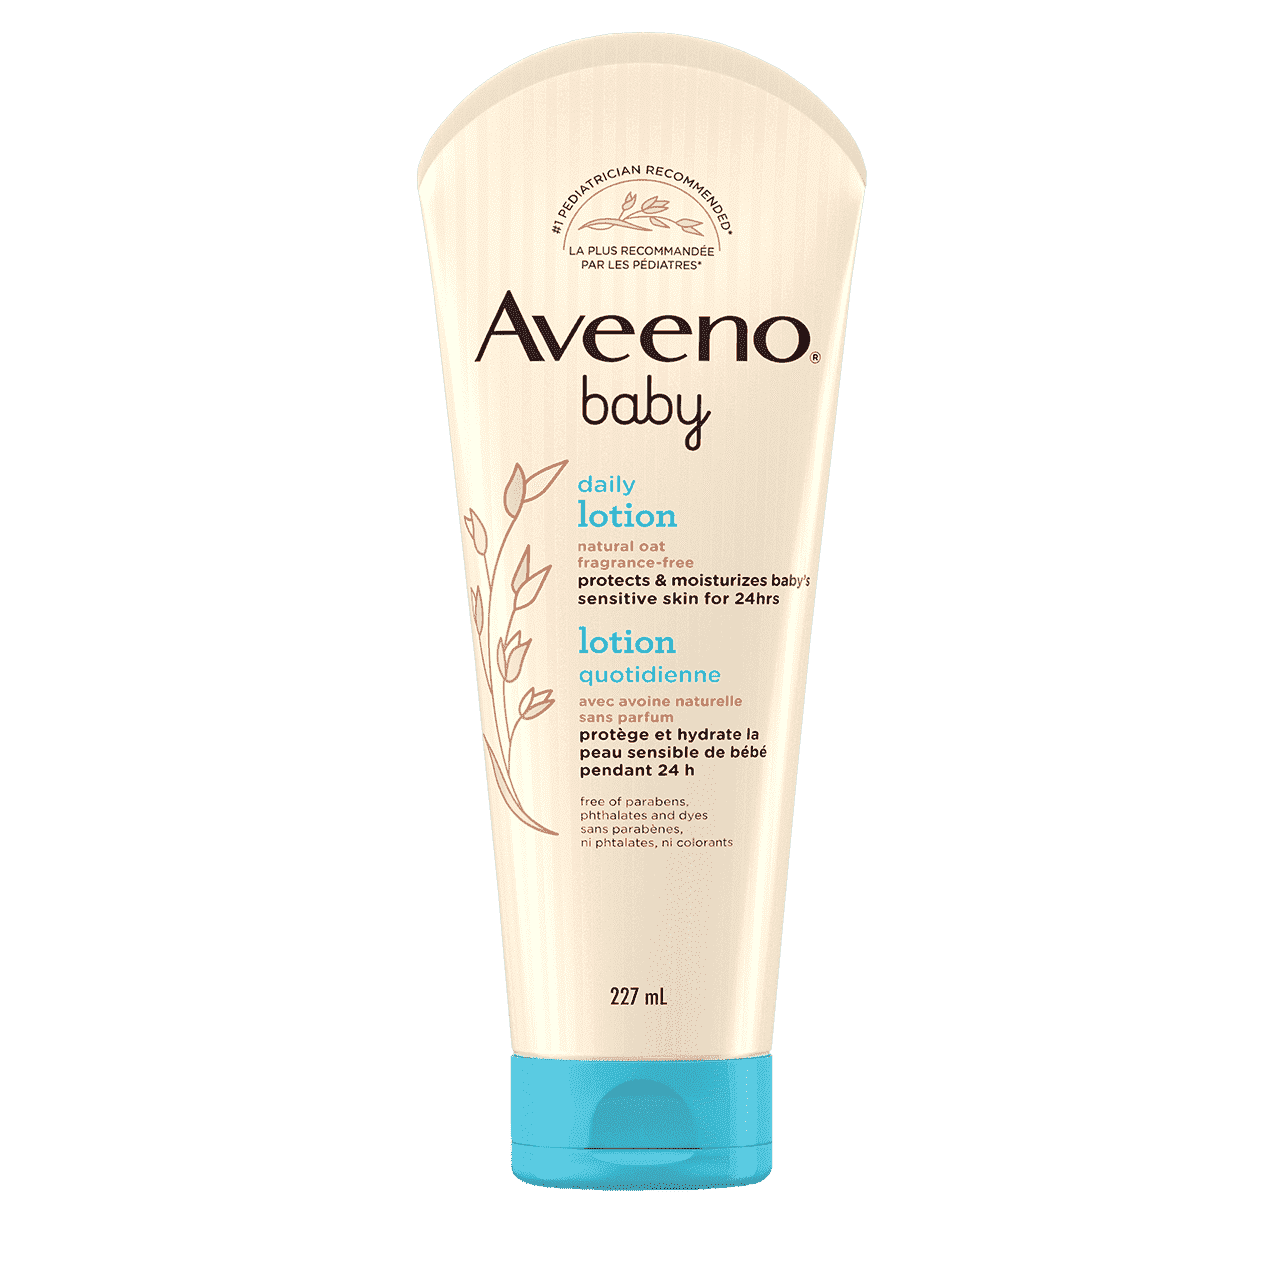 227ml bottle of Aveeno Baby Daily Lotion